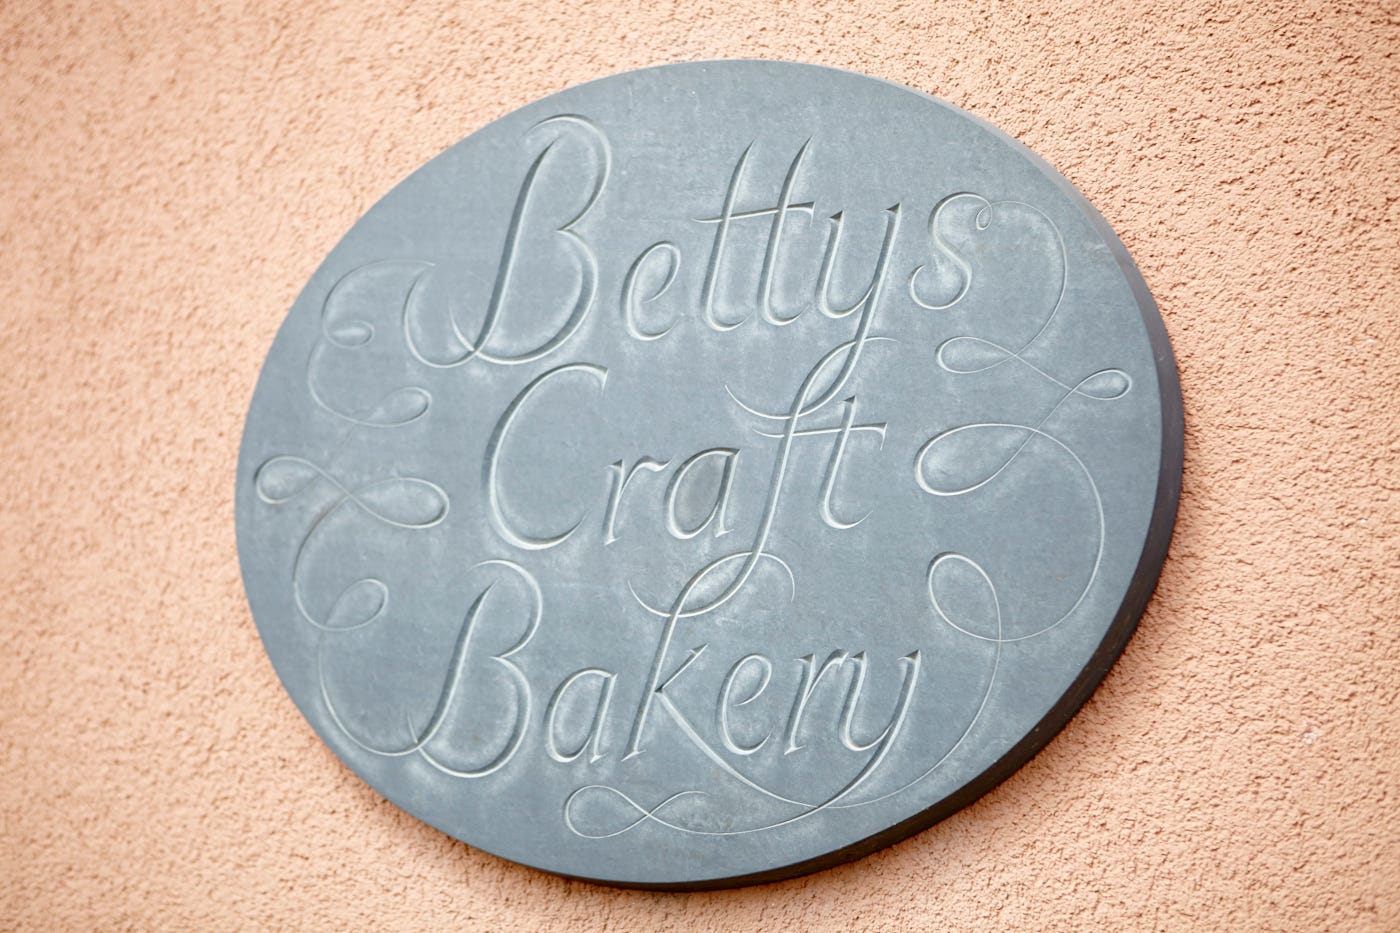 Bettys Craft Bakery Sign on a wall